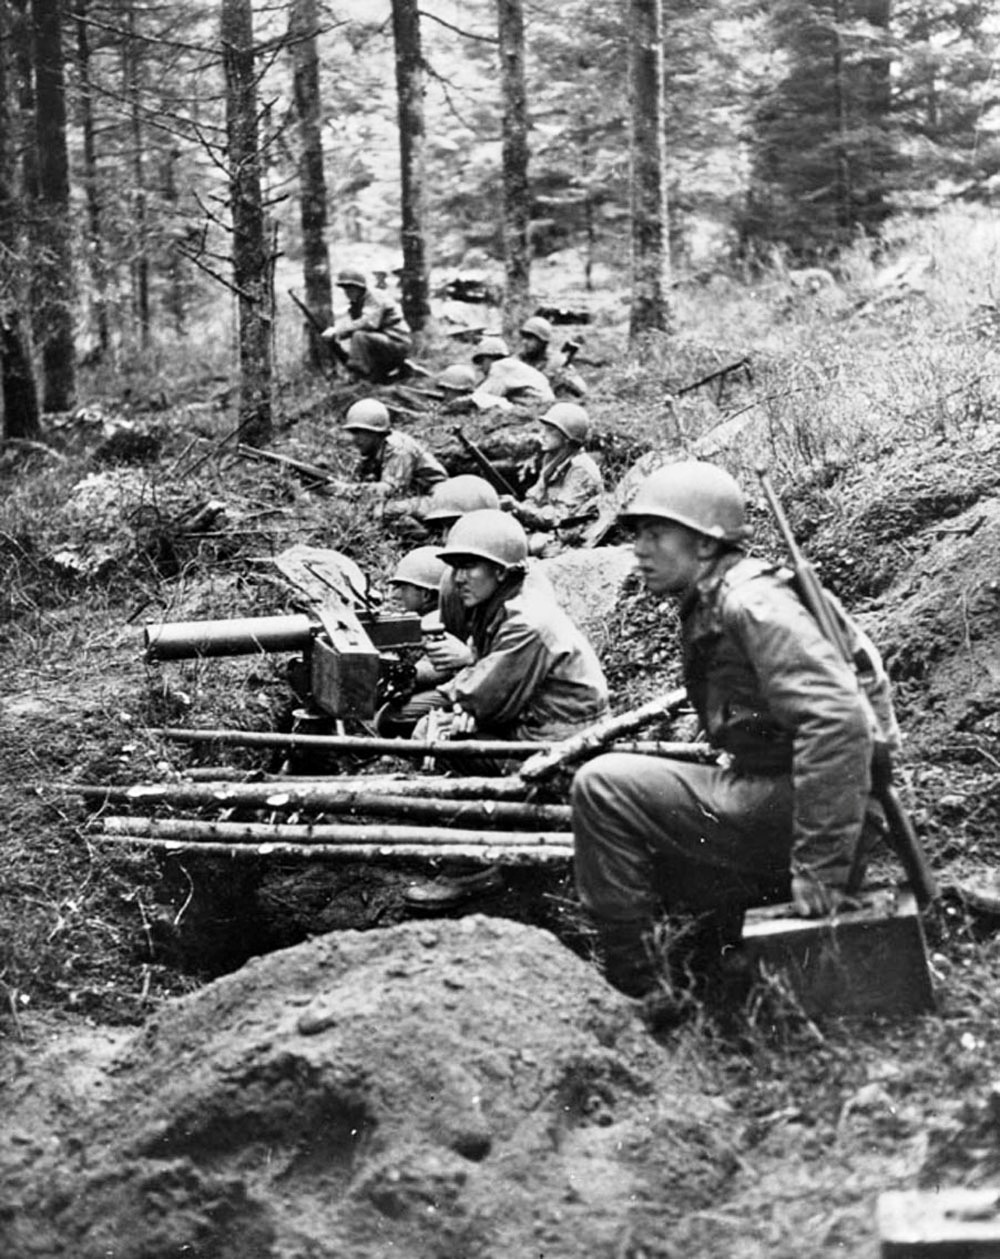 Members of the US 22nd Infantry Regiment holding the line during heavy fighting near Großhau, Germany during the Battle of the Hürtgen Forest, 1 Dec 1944. Note the M1917 machine gun and M1 Garand rifles.